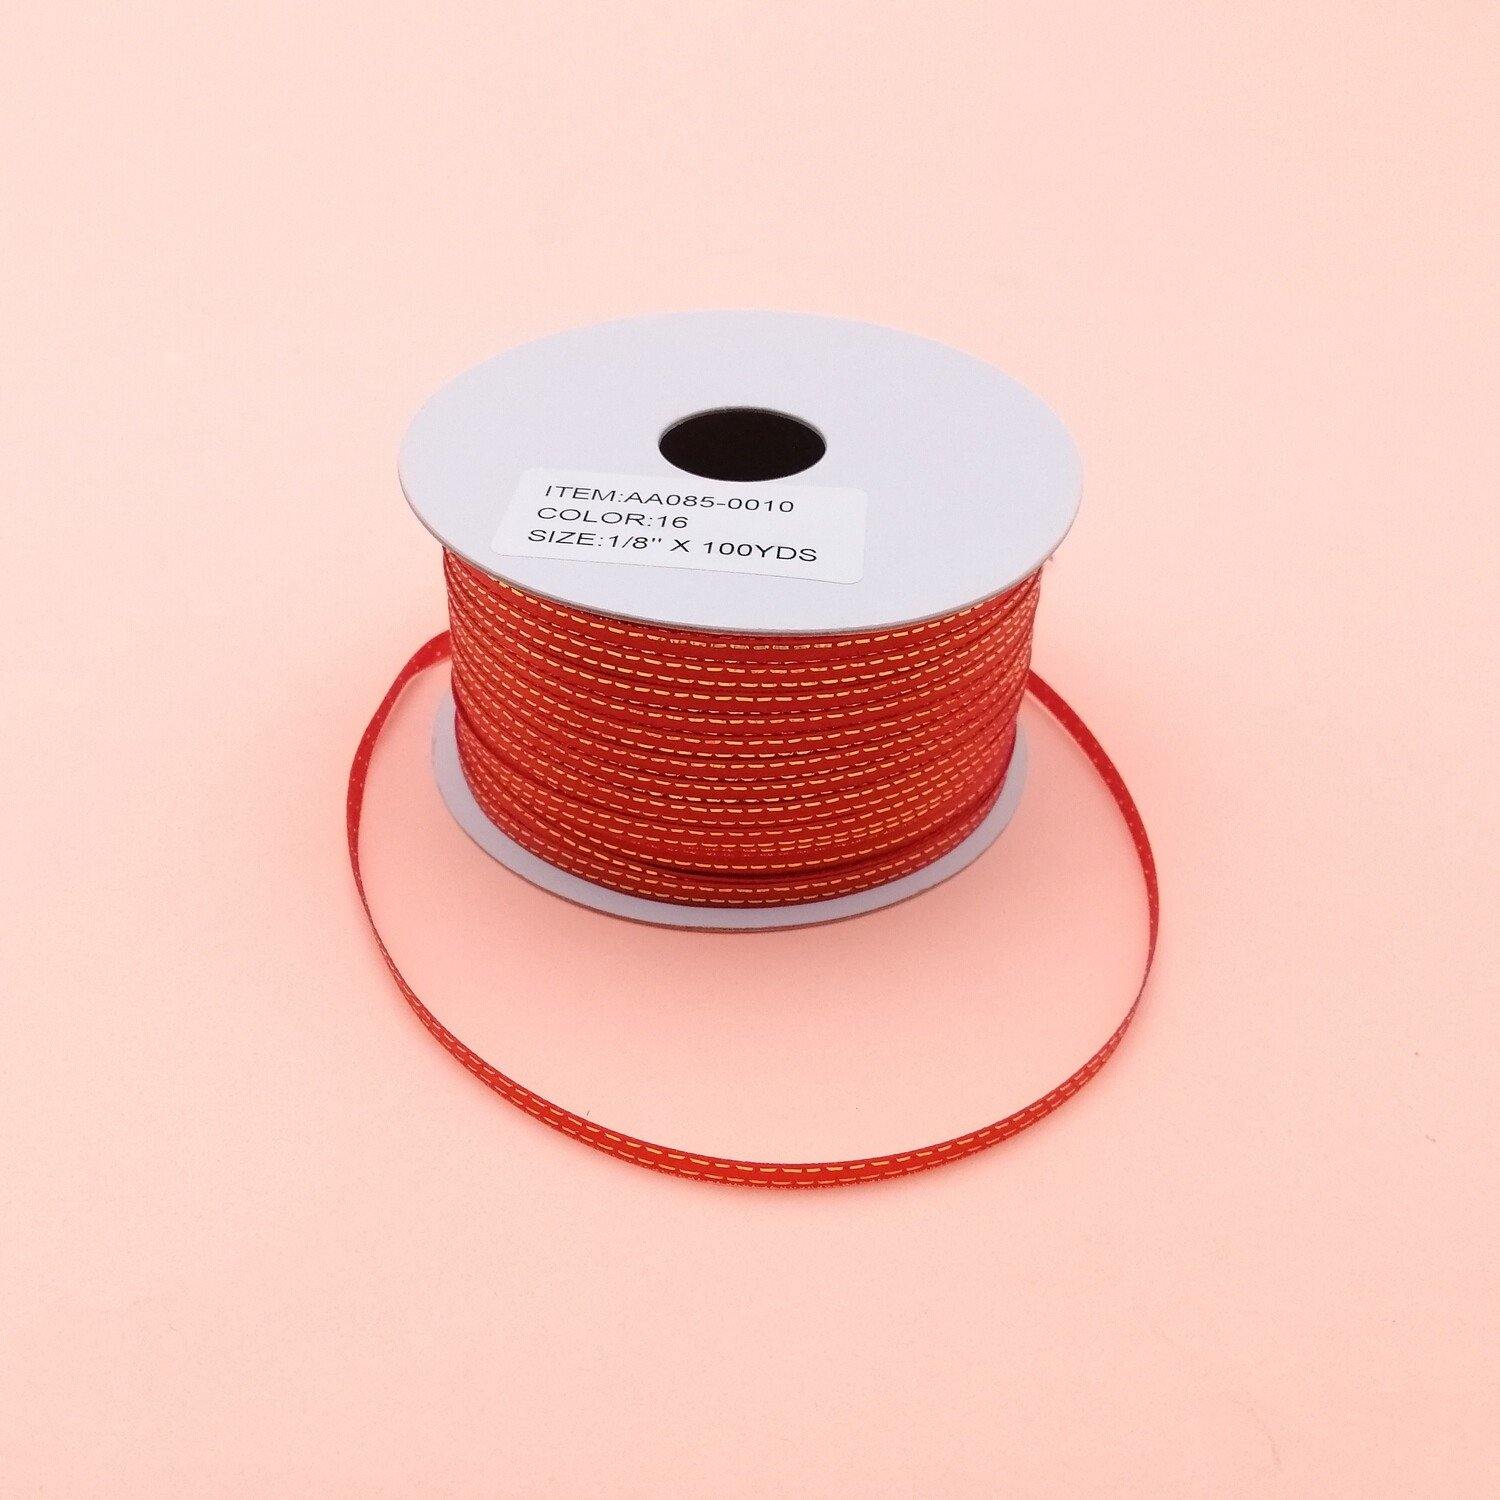 1/8" RED W/ GOLD RIBBON 1ROLL (100YDS) - Kitchen Convenience: Ingredients & Supplies Delivery